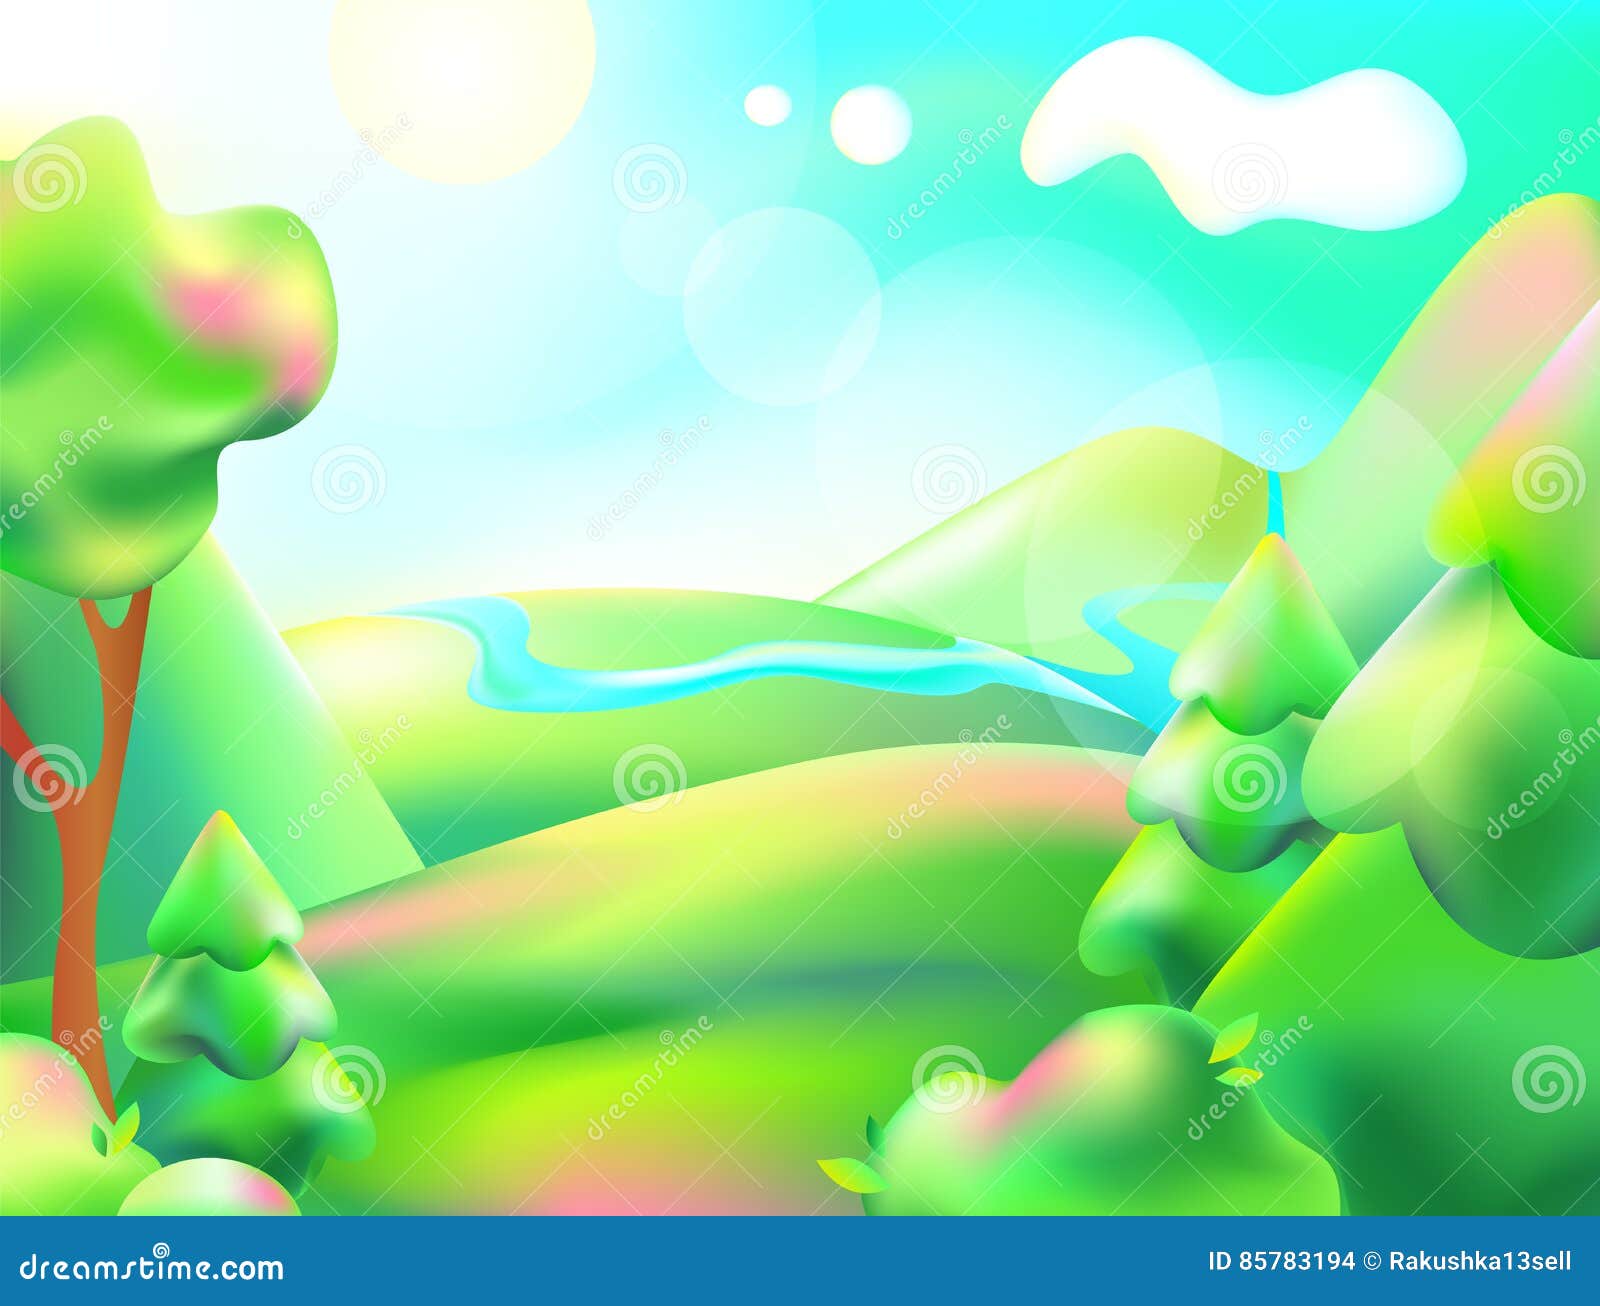 Vector Illustration of Colorful Nature. Cartoon Landscape of a Sunny Summer  Day Stock Vector - Illustration of background, green: 85783194